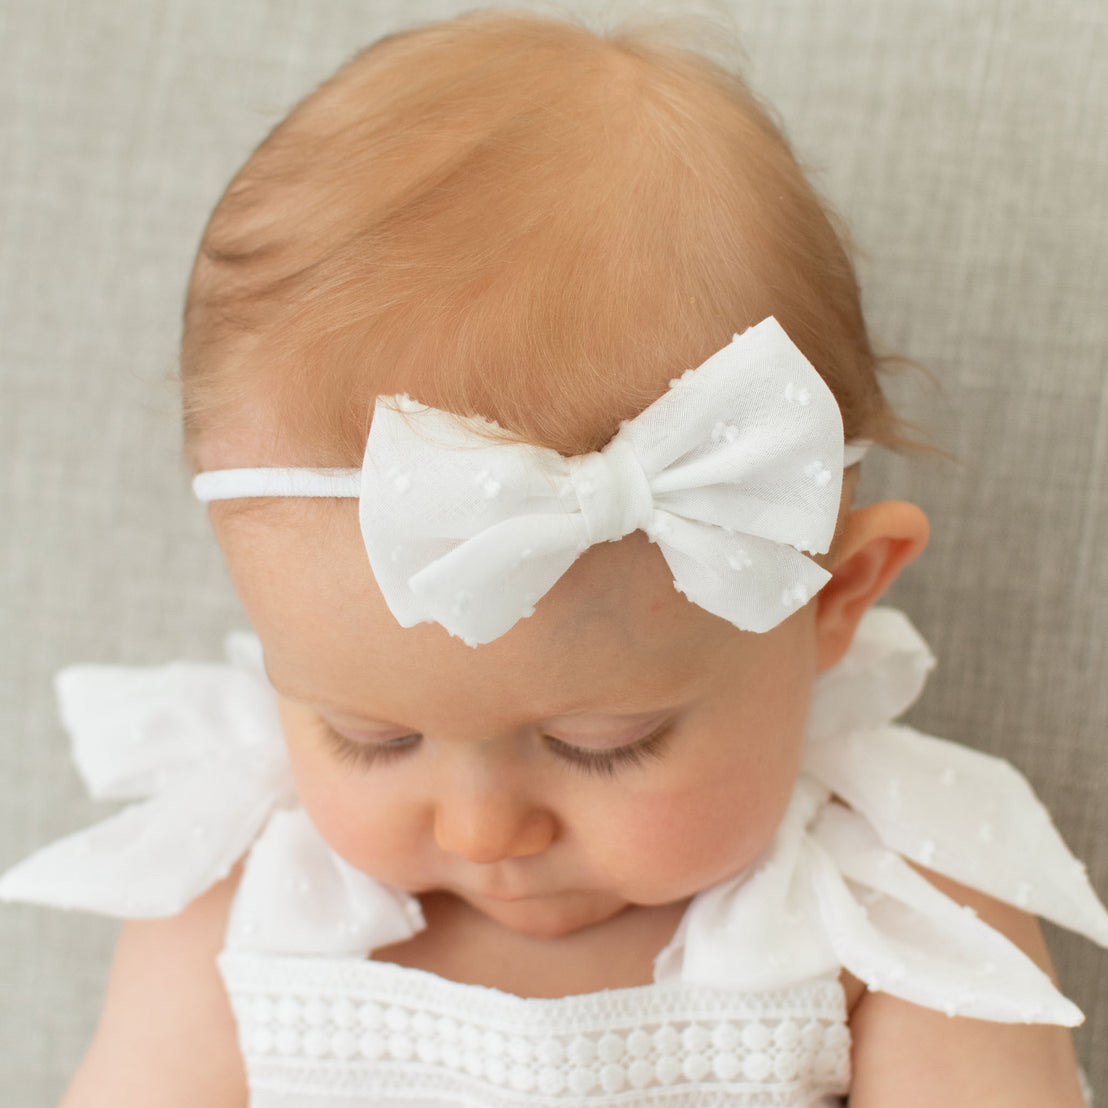 A newborn with light brown hair wearing the Mila Bow Headband and Mila Cotton Gown, looking downward against a textured grey background.